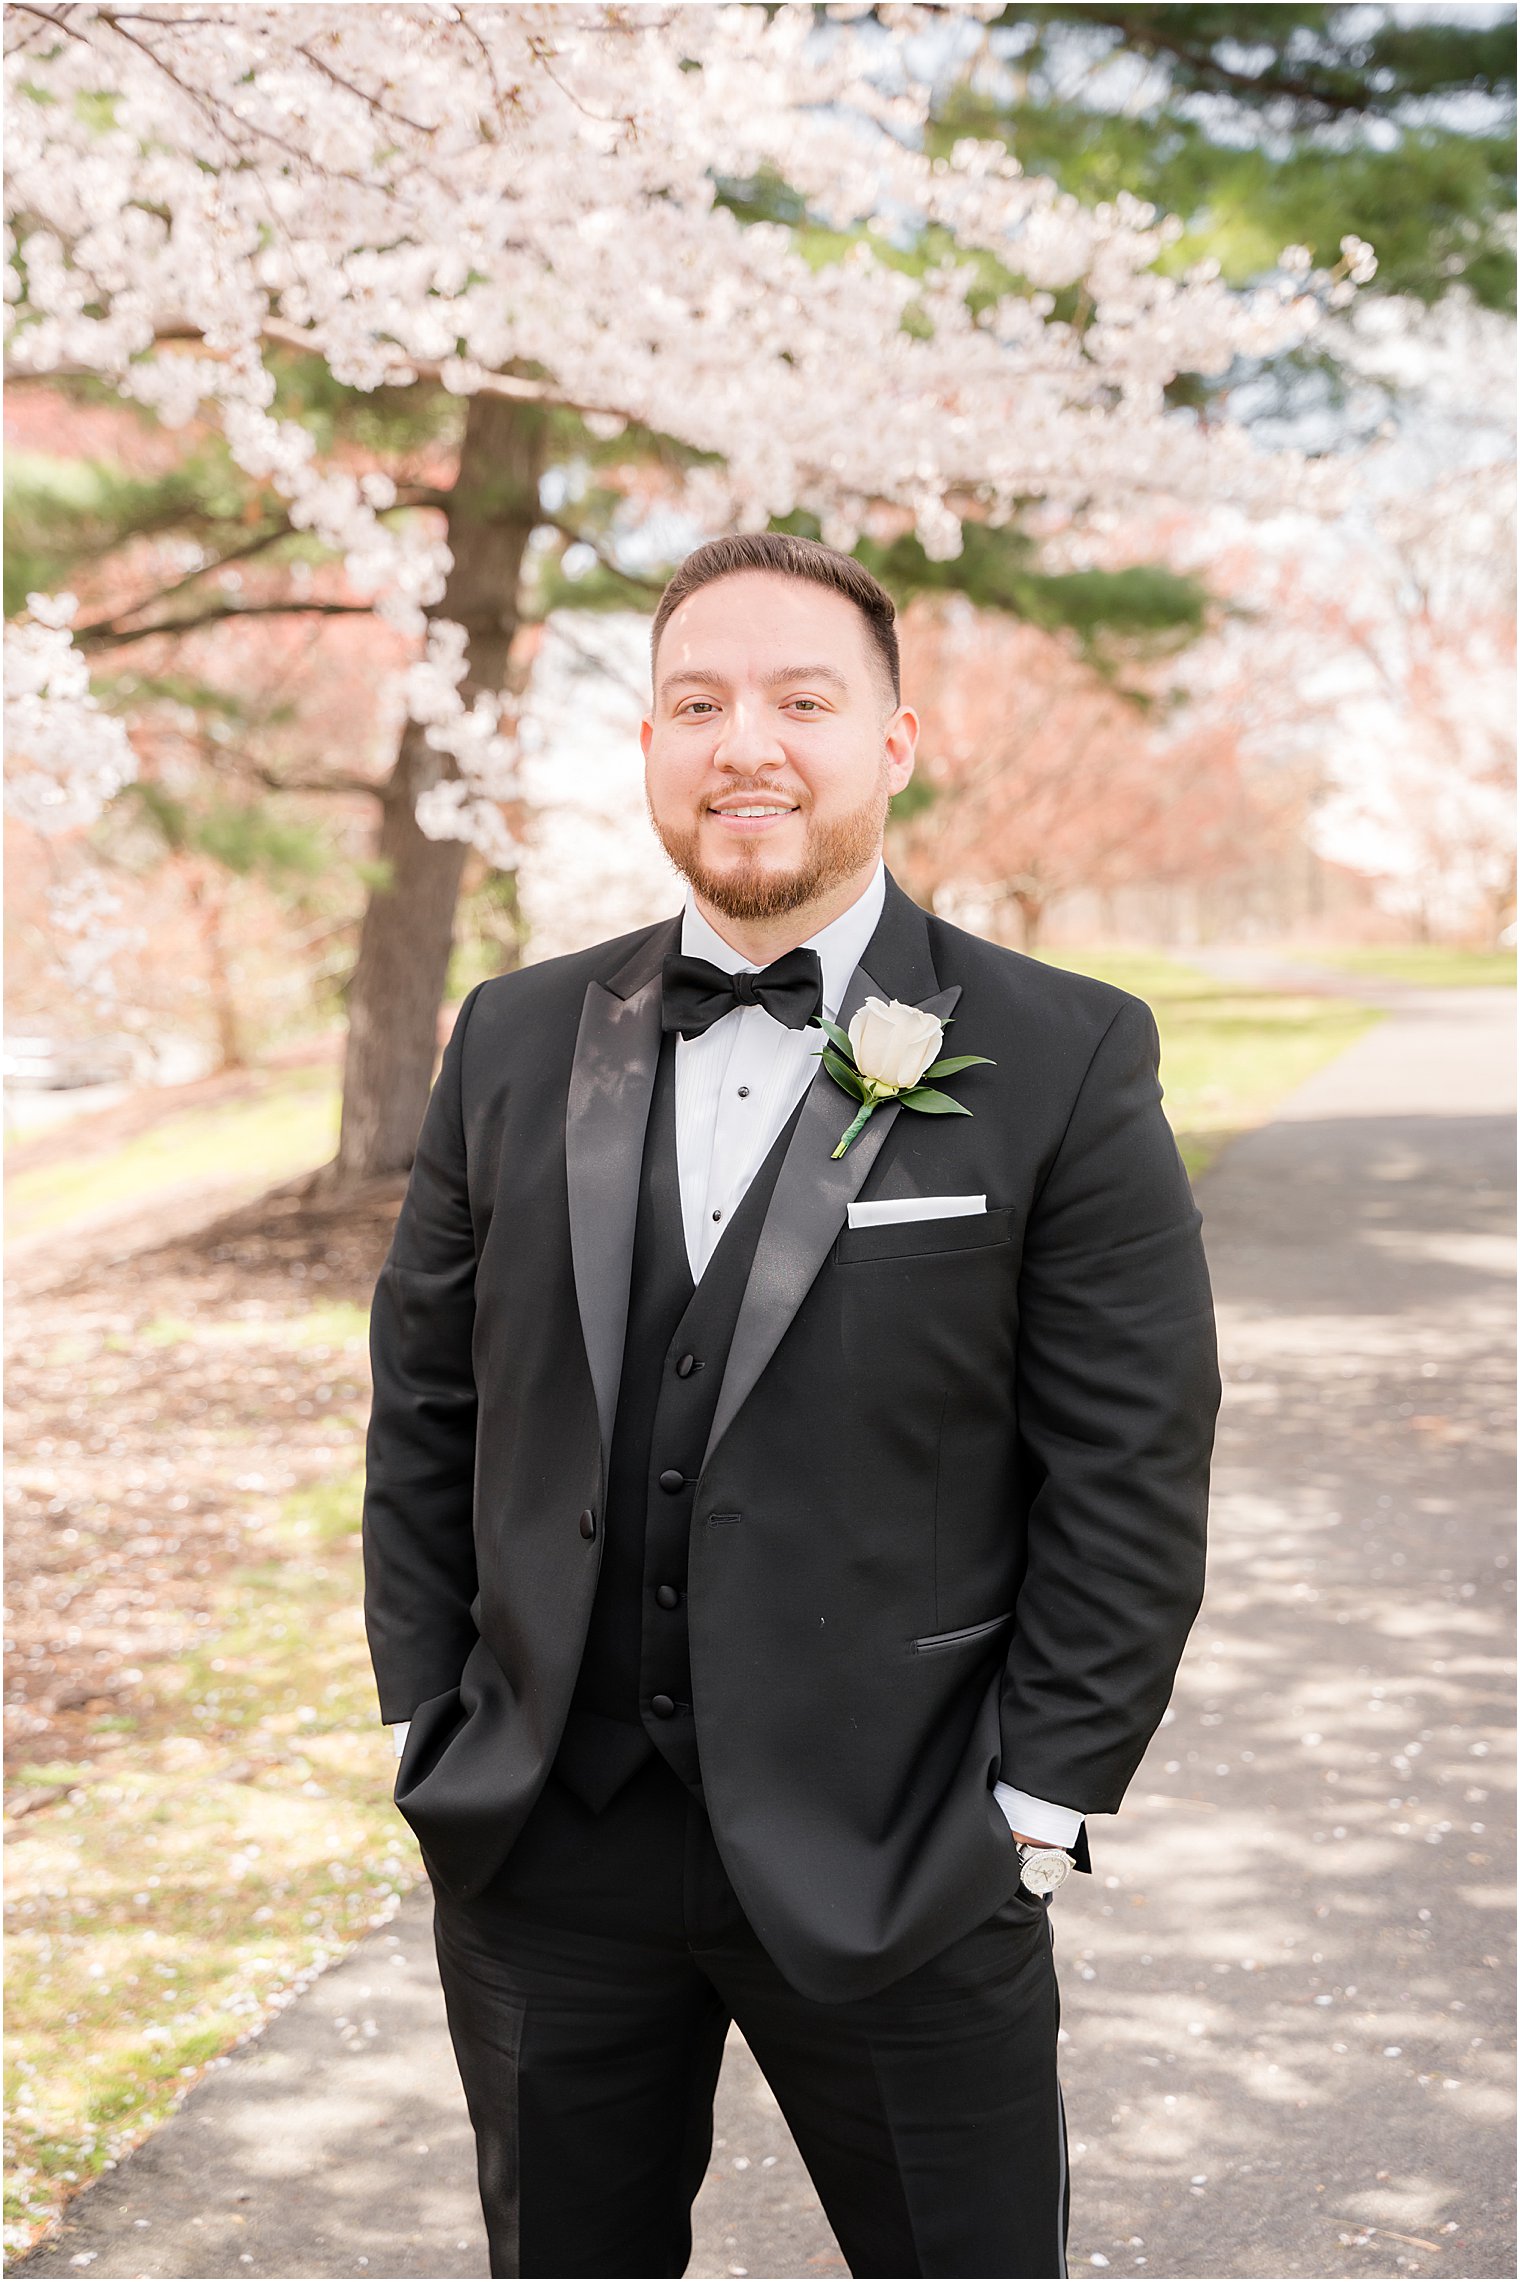 groom poses in classic tux by cherry blossoms